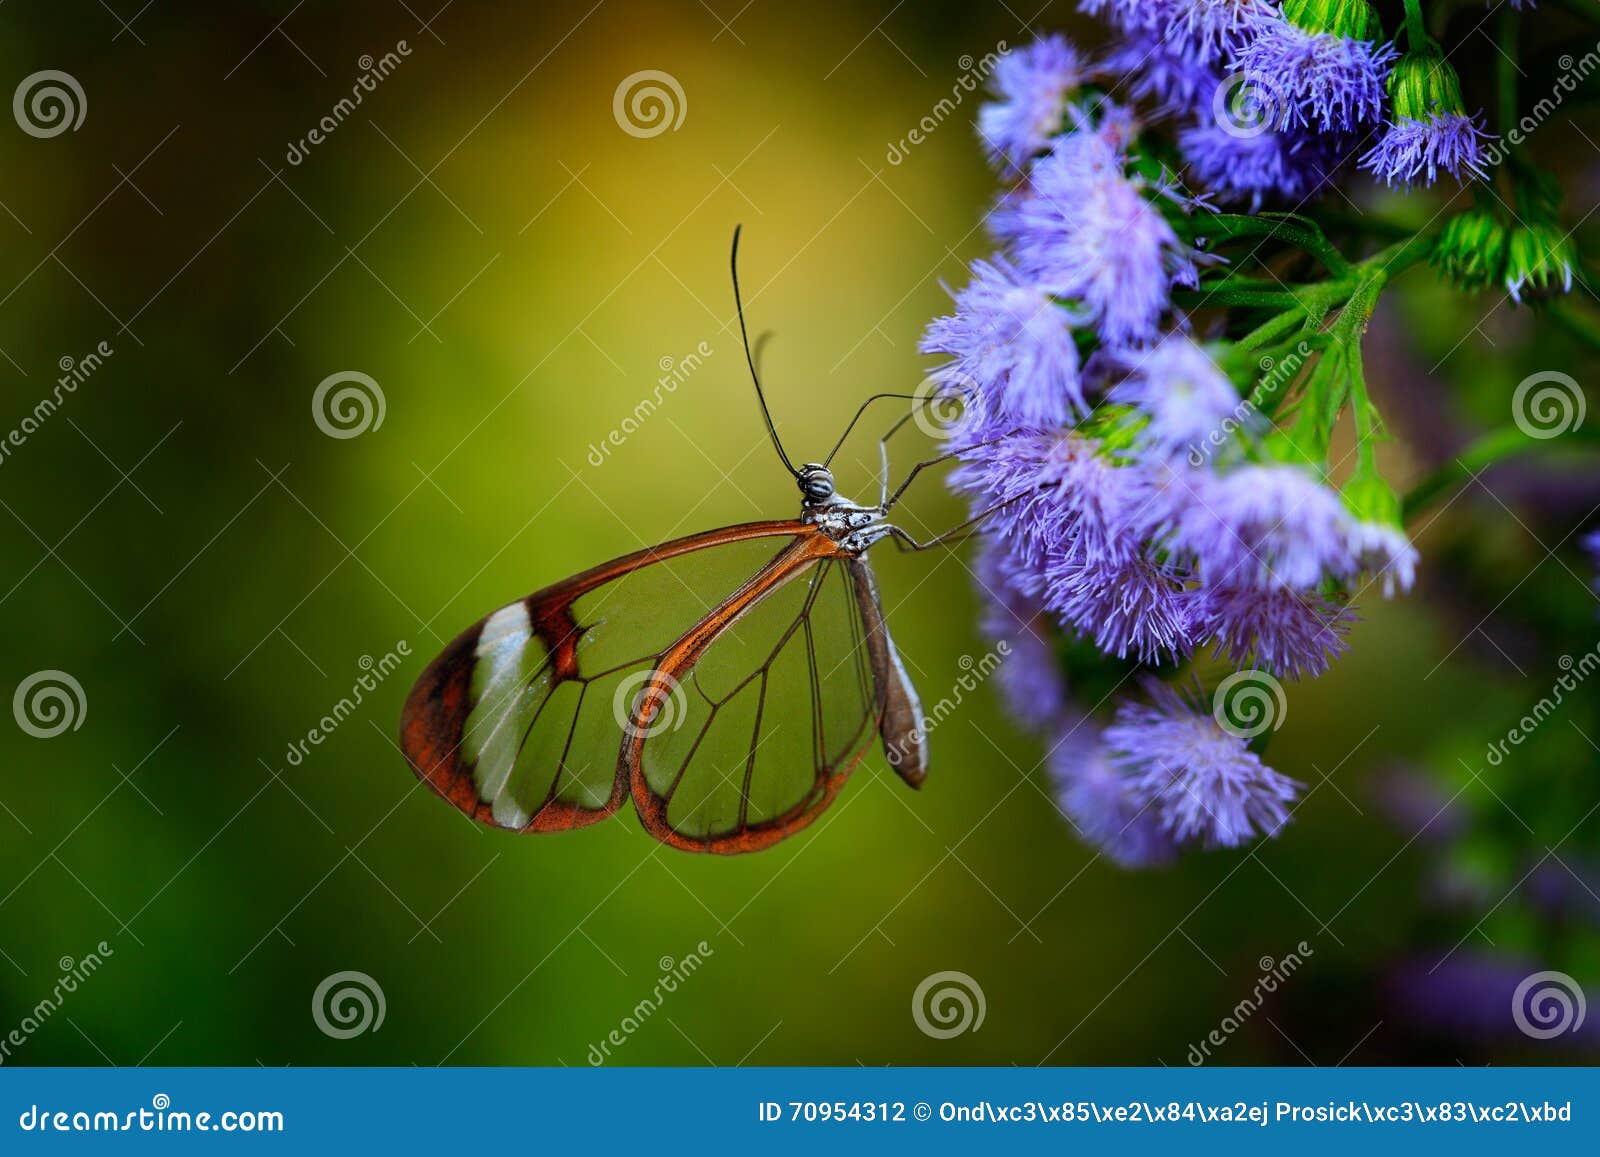 nero glasswing, greta nero, close-up of transparent glass wing butterfly on green leaves, scene from tropical forest, costa rica,